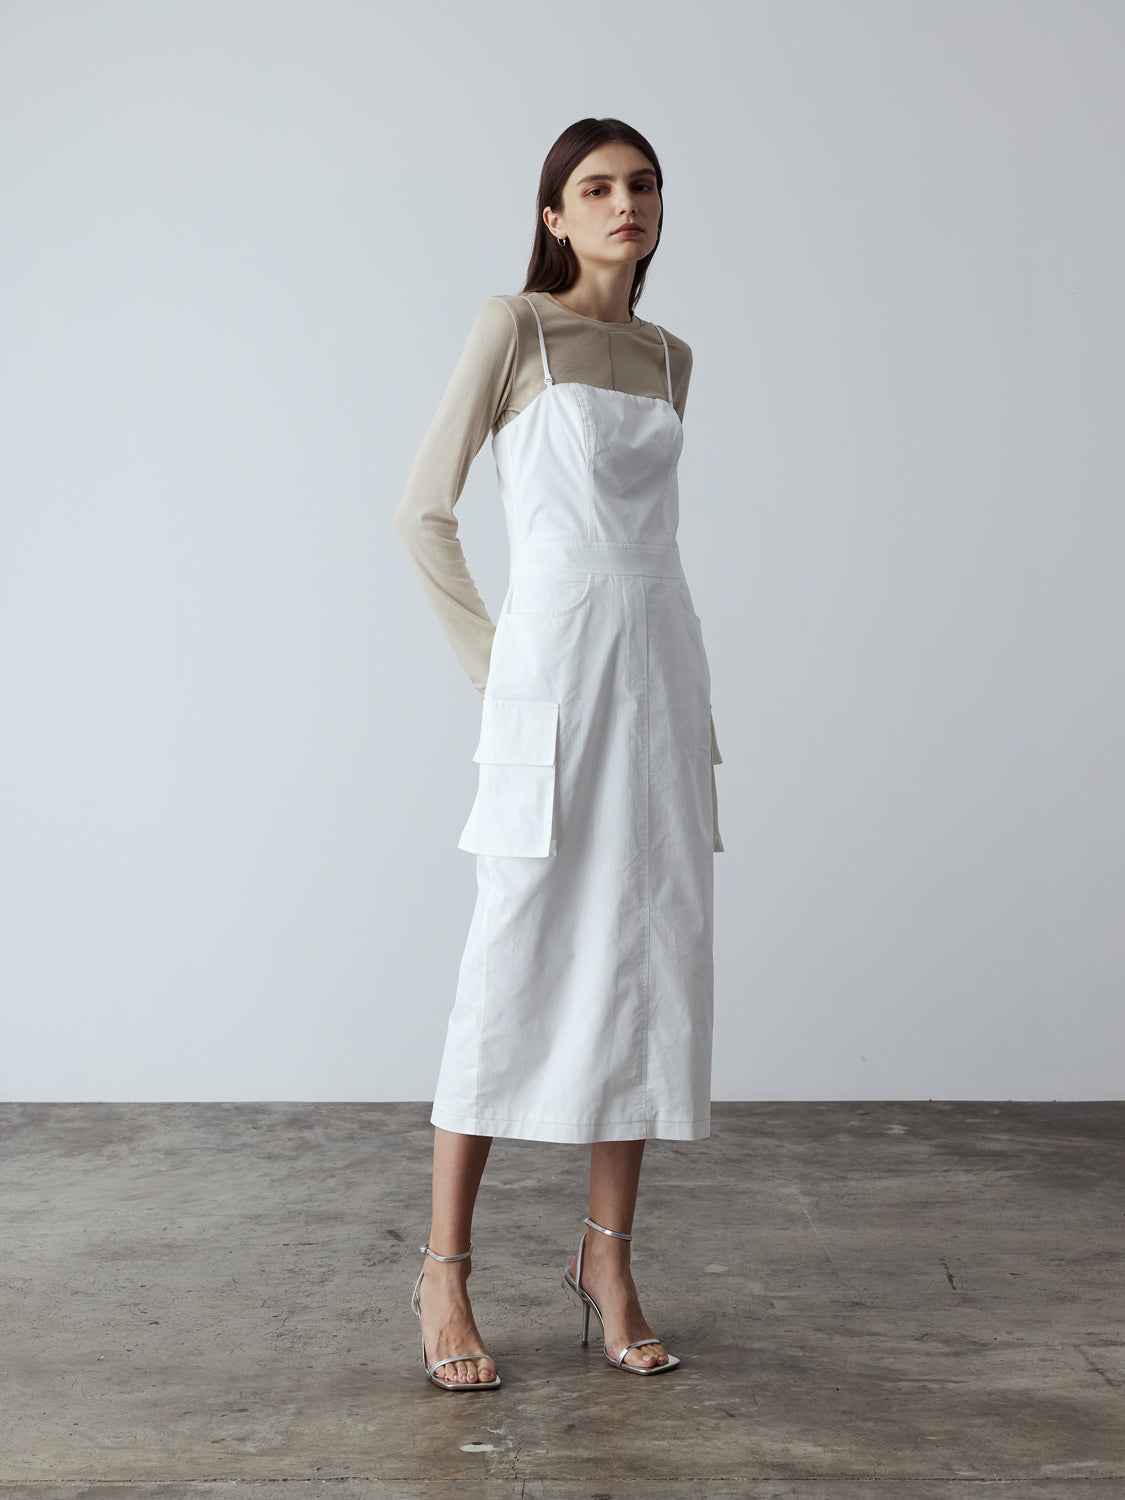 white : Model is wearing the Adjustable Cargo Dress in White, which comes with back pockets, and cargo and slash pockets at the sides. This is a sleeveless garment with spaghetti straps. Can also be worn as a tube dress. Worn with silver heels.